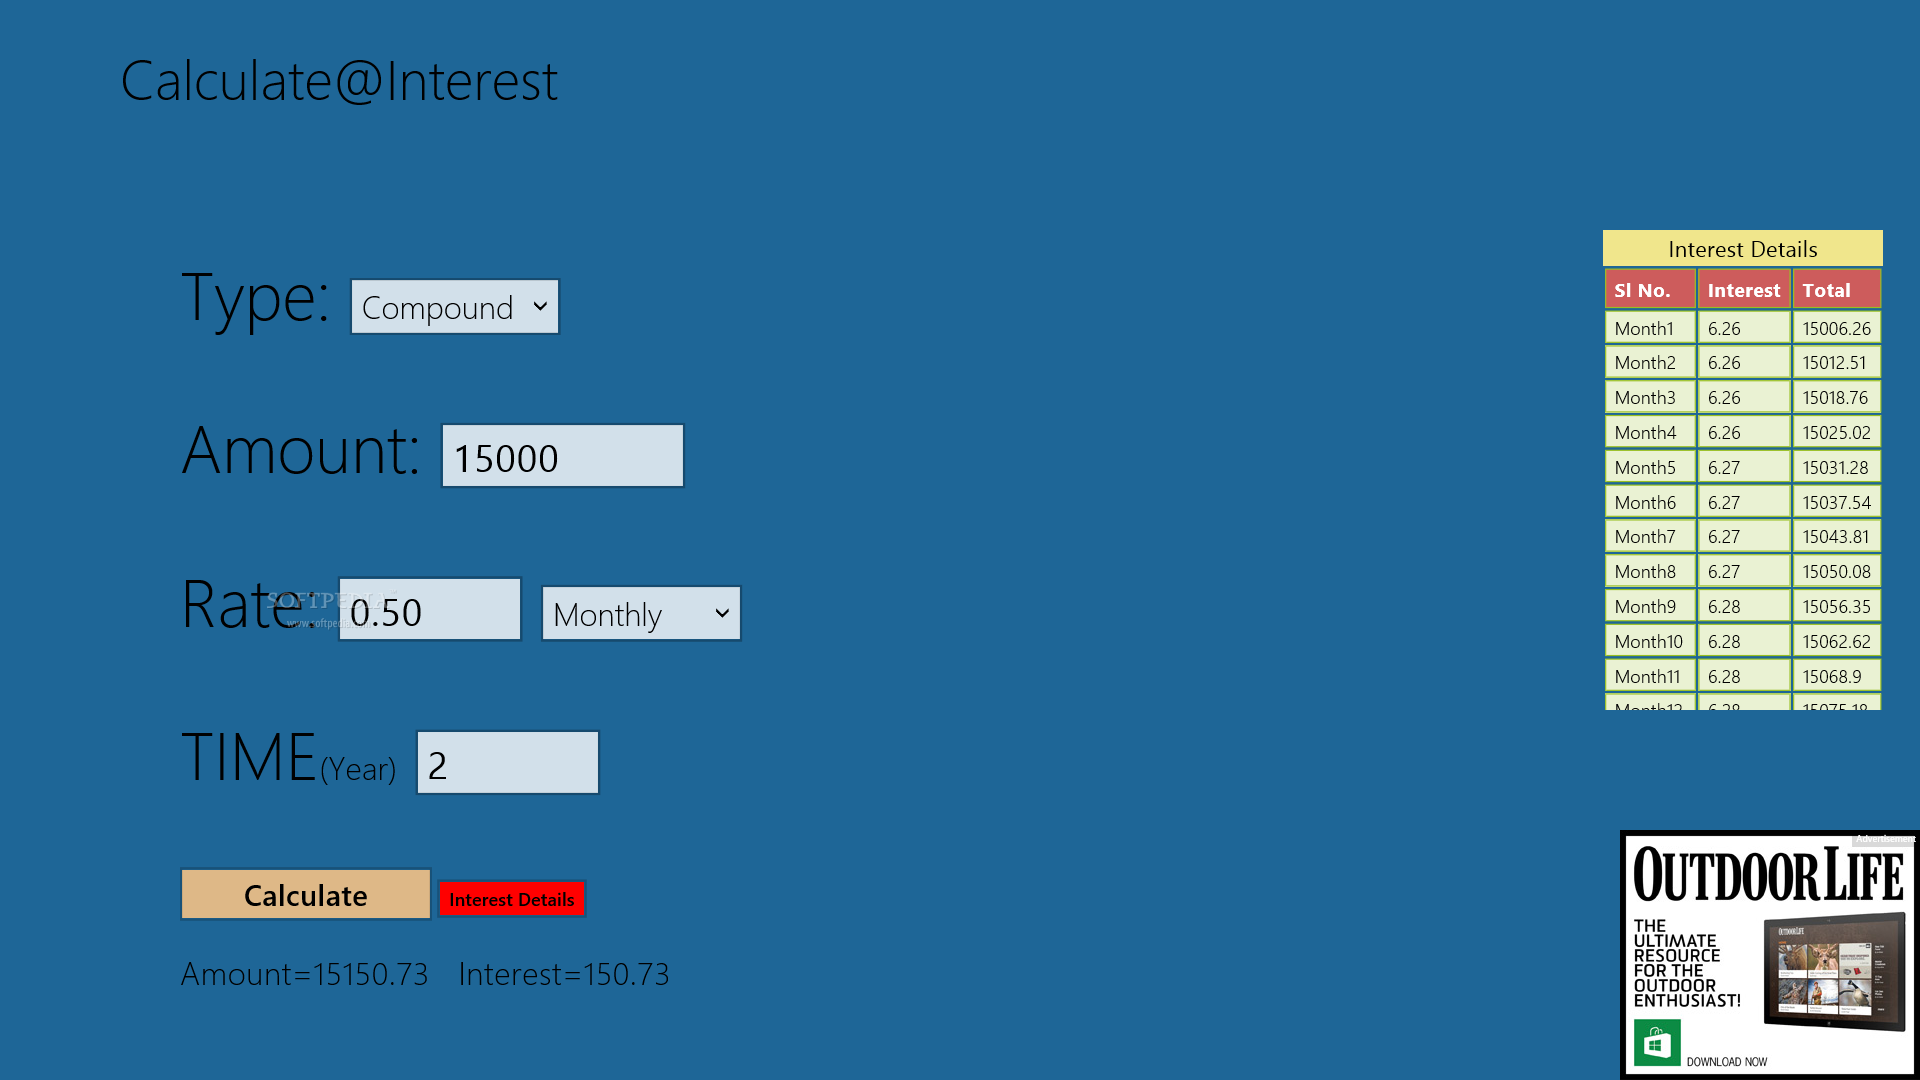 Top 10 Others Apps Like Calculate@Interest - Best Alternatives